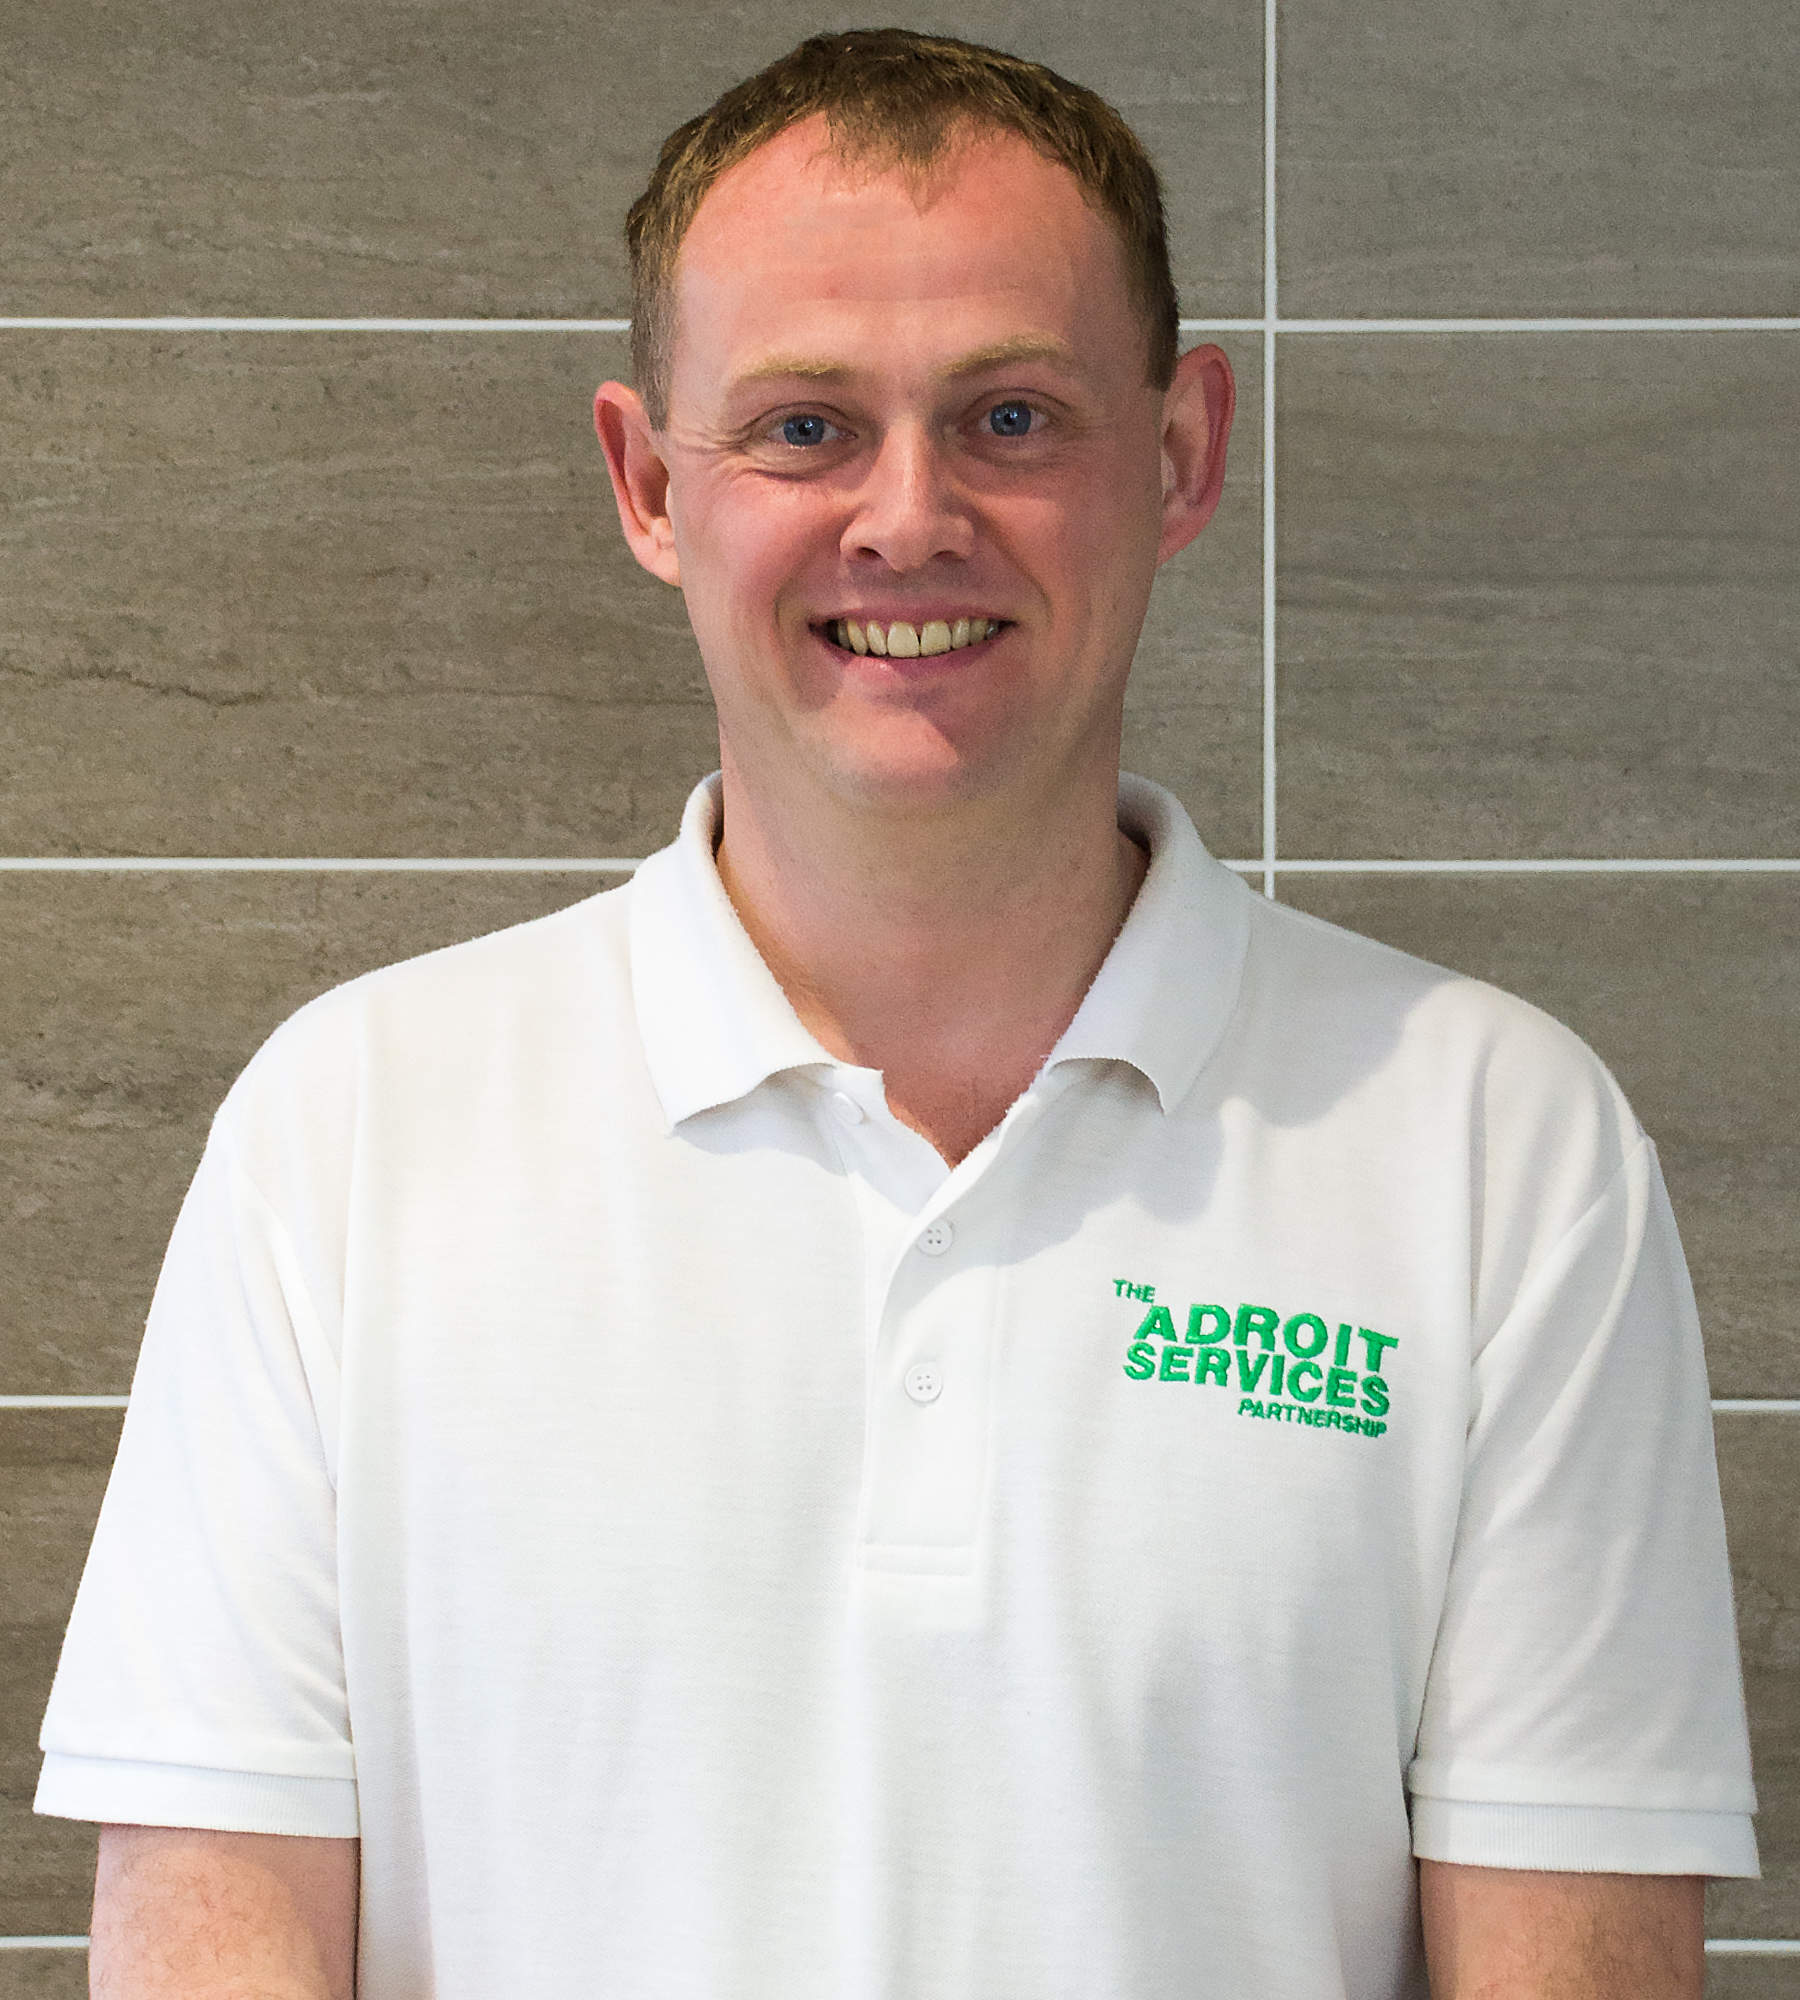 Installing for over 15 years, Paul also quotes and looks after Health & Safety training.